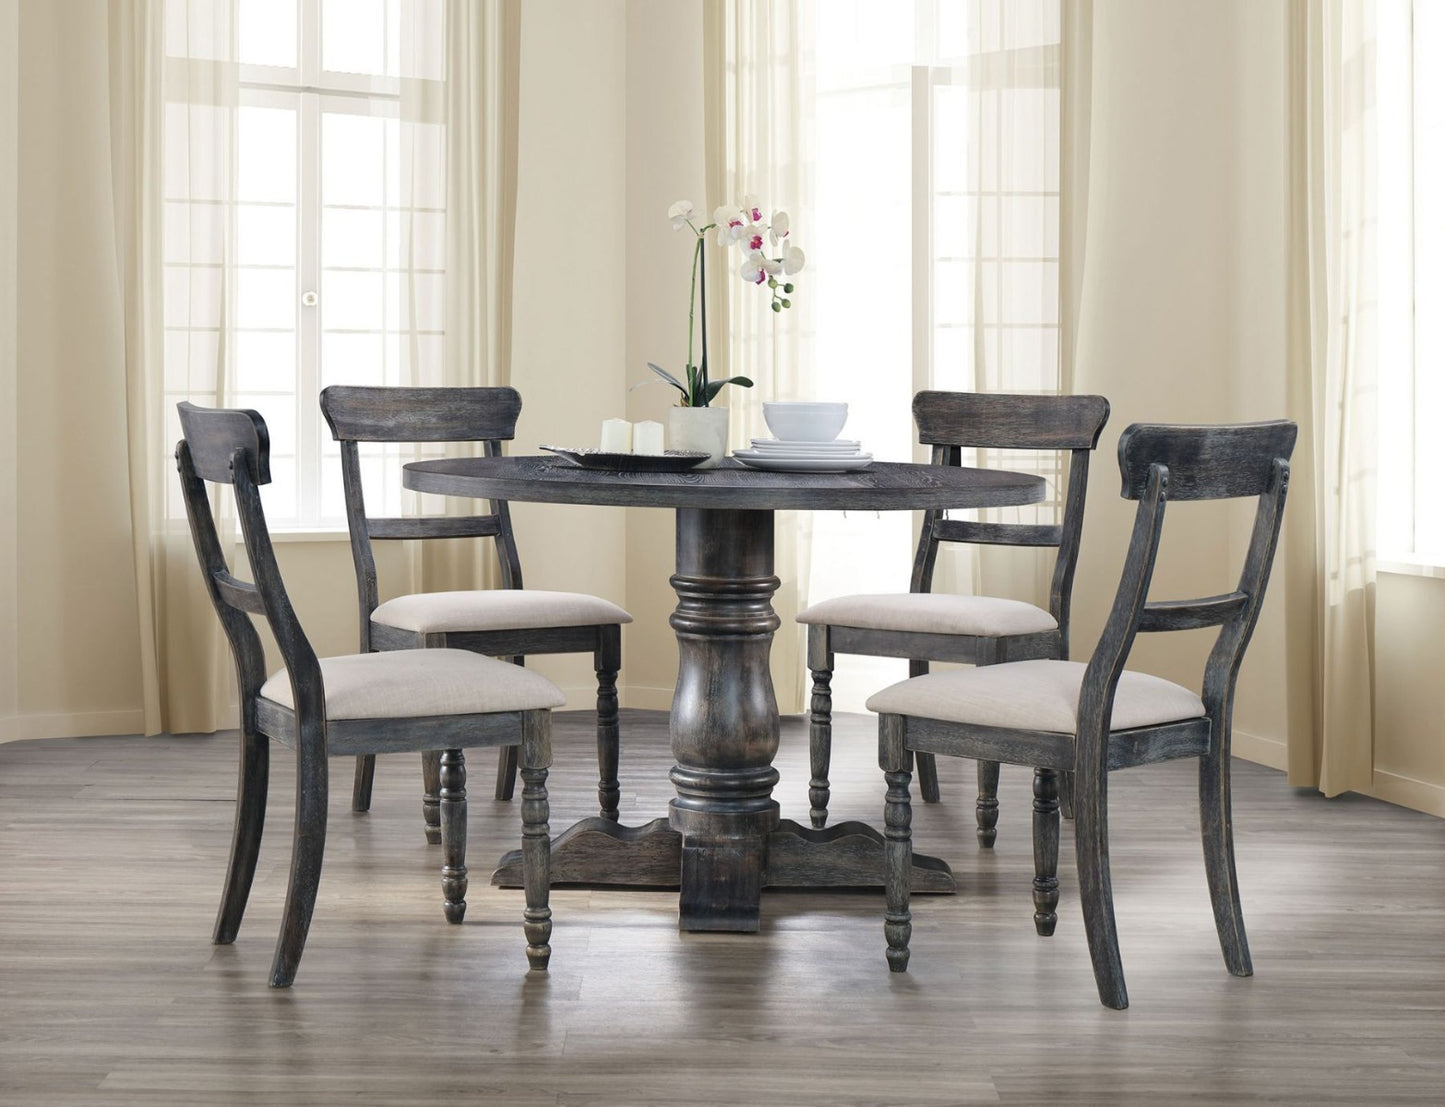 Acme Leventis Round Table Dining Collection - Pedestal Base